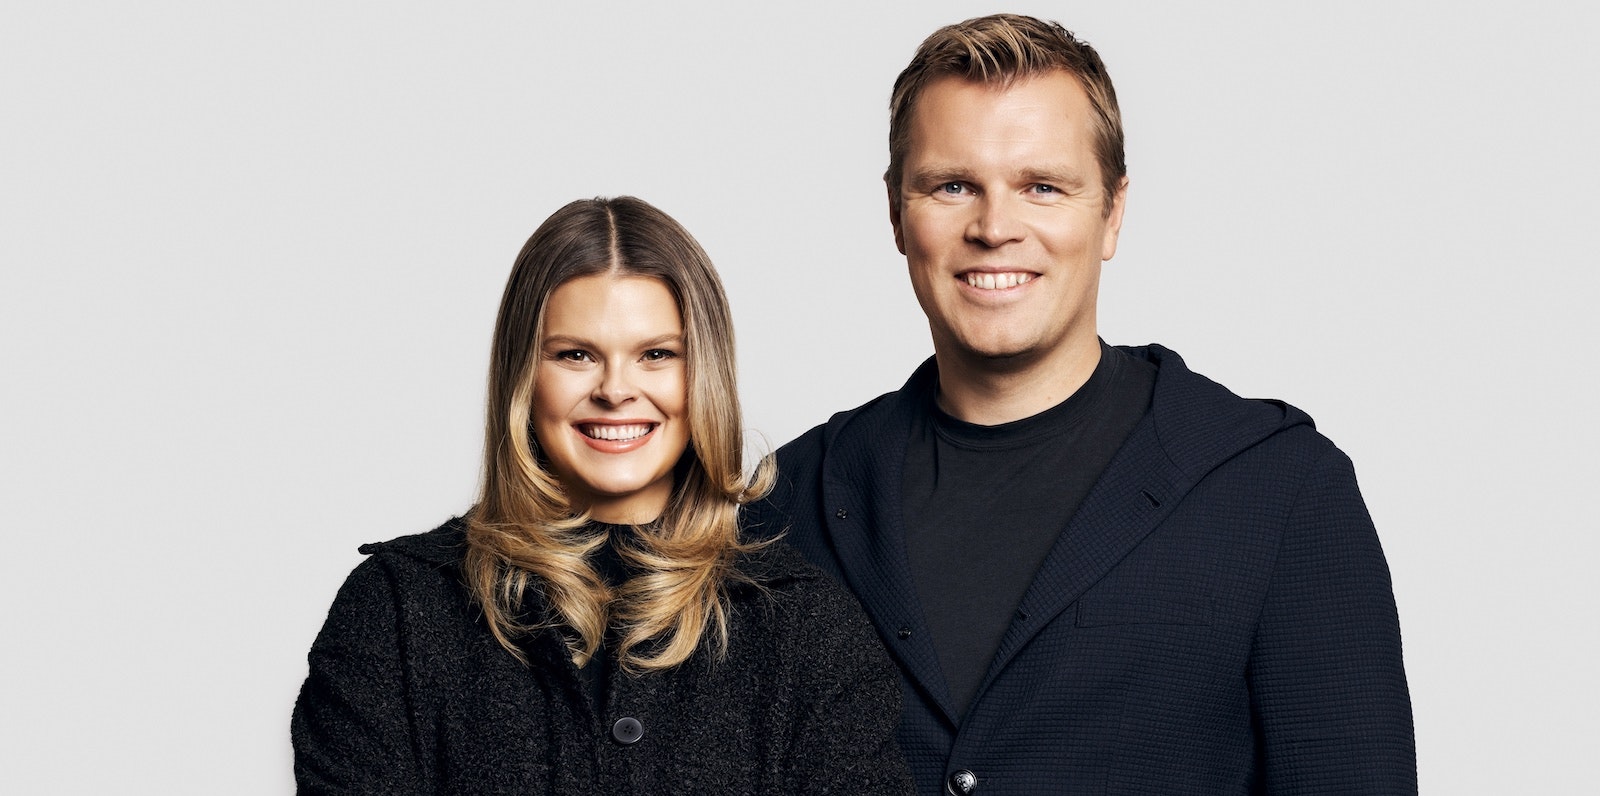 Picture of Einride's founders Linnea Kornehed and Robert Falck